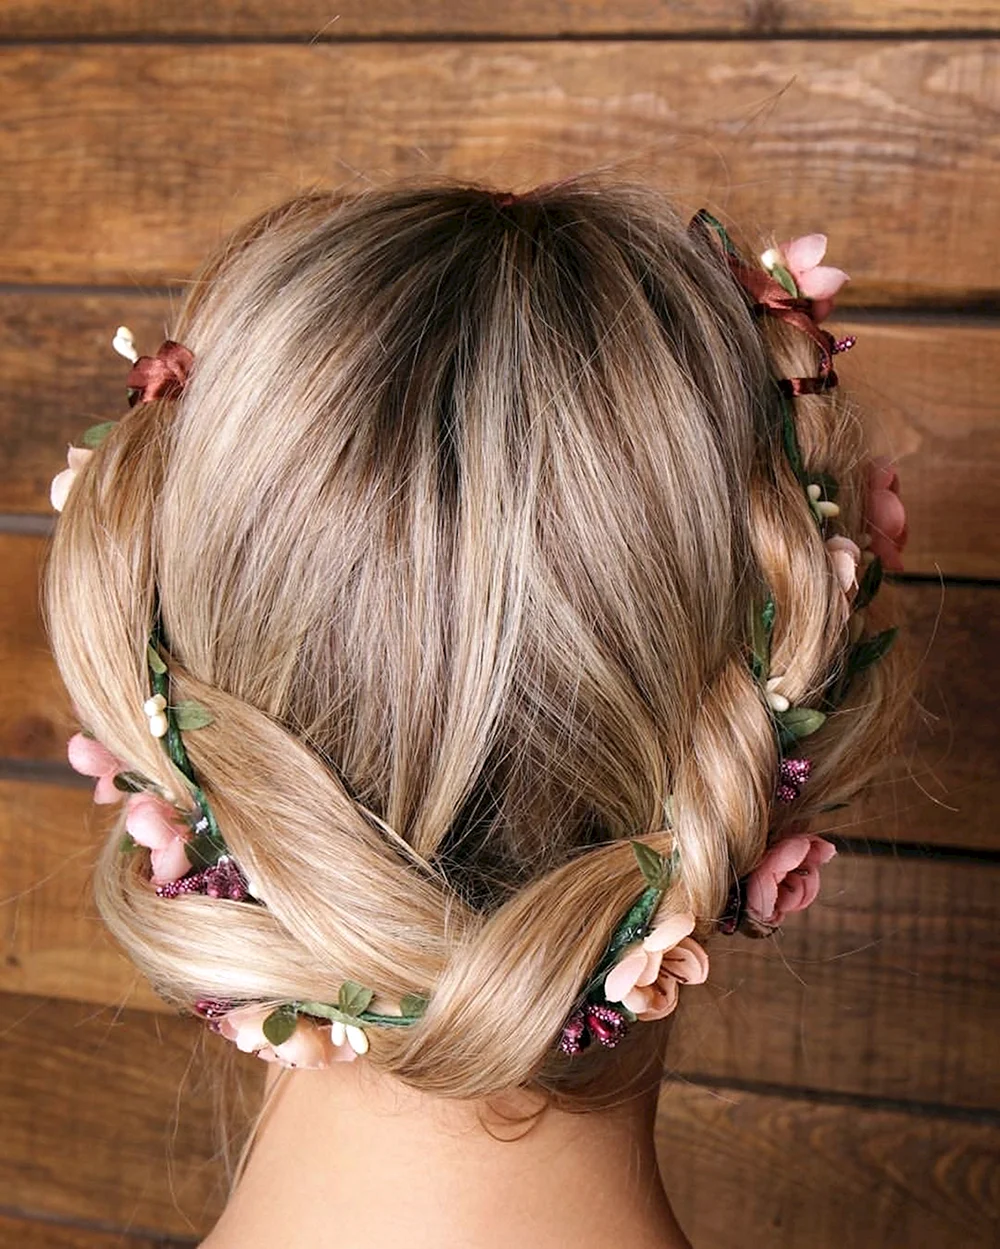 Floral Wreath Hairstyles